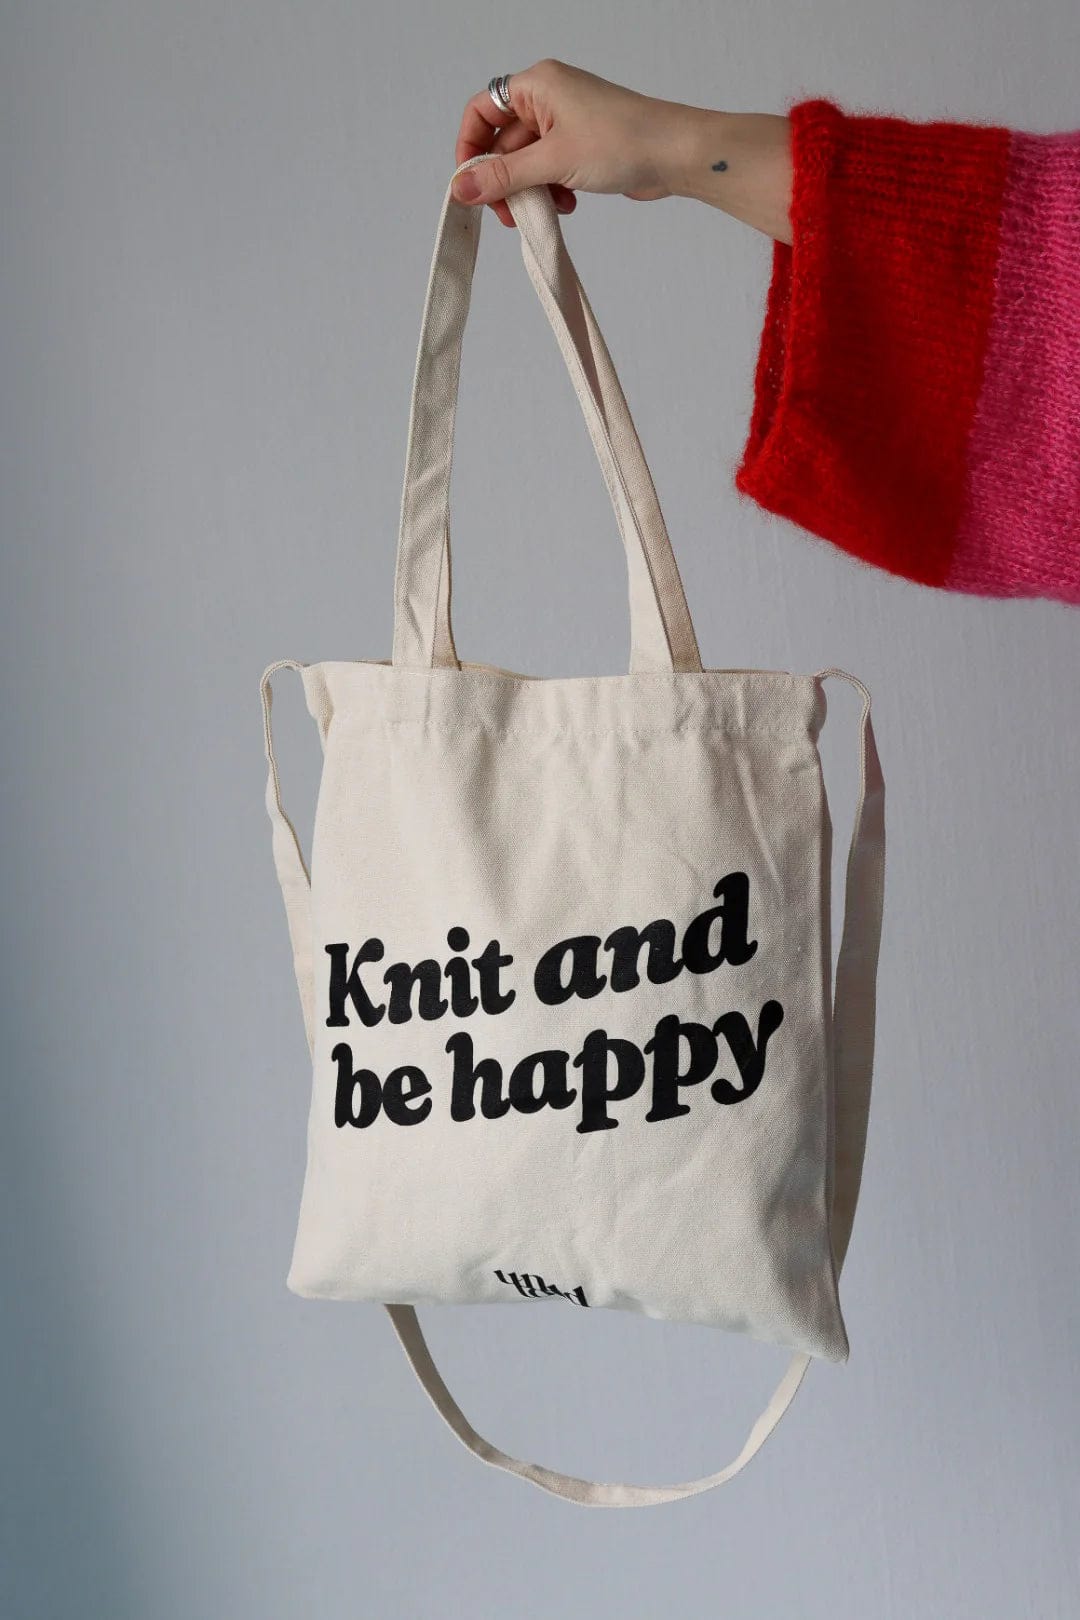 Knit And Be Happy Tote Bag by Un-Told